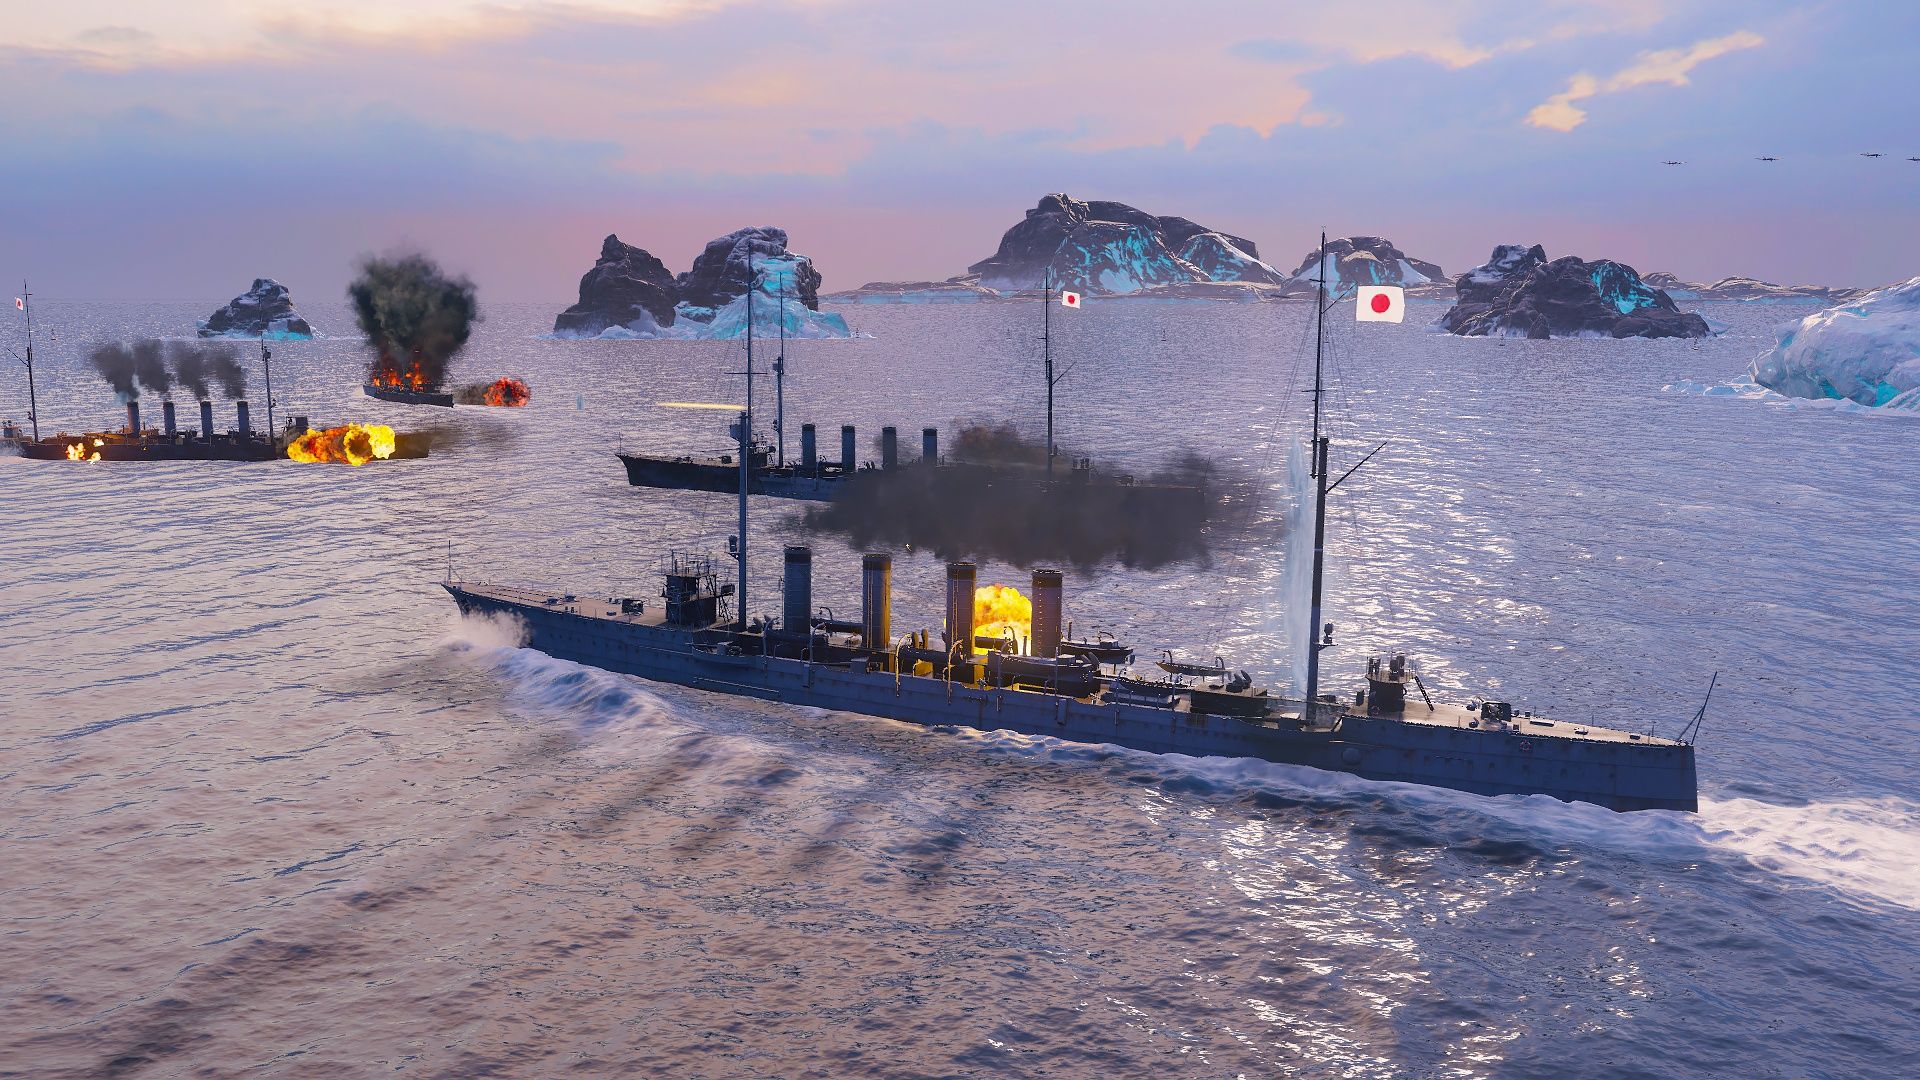 ps4 world of warships legends ships